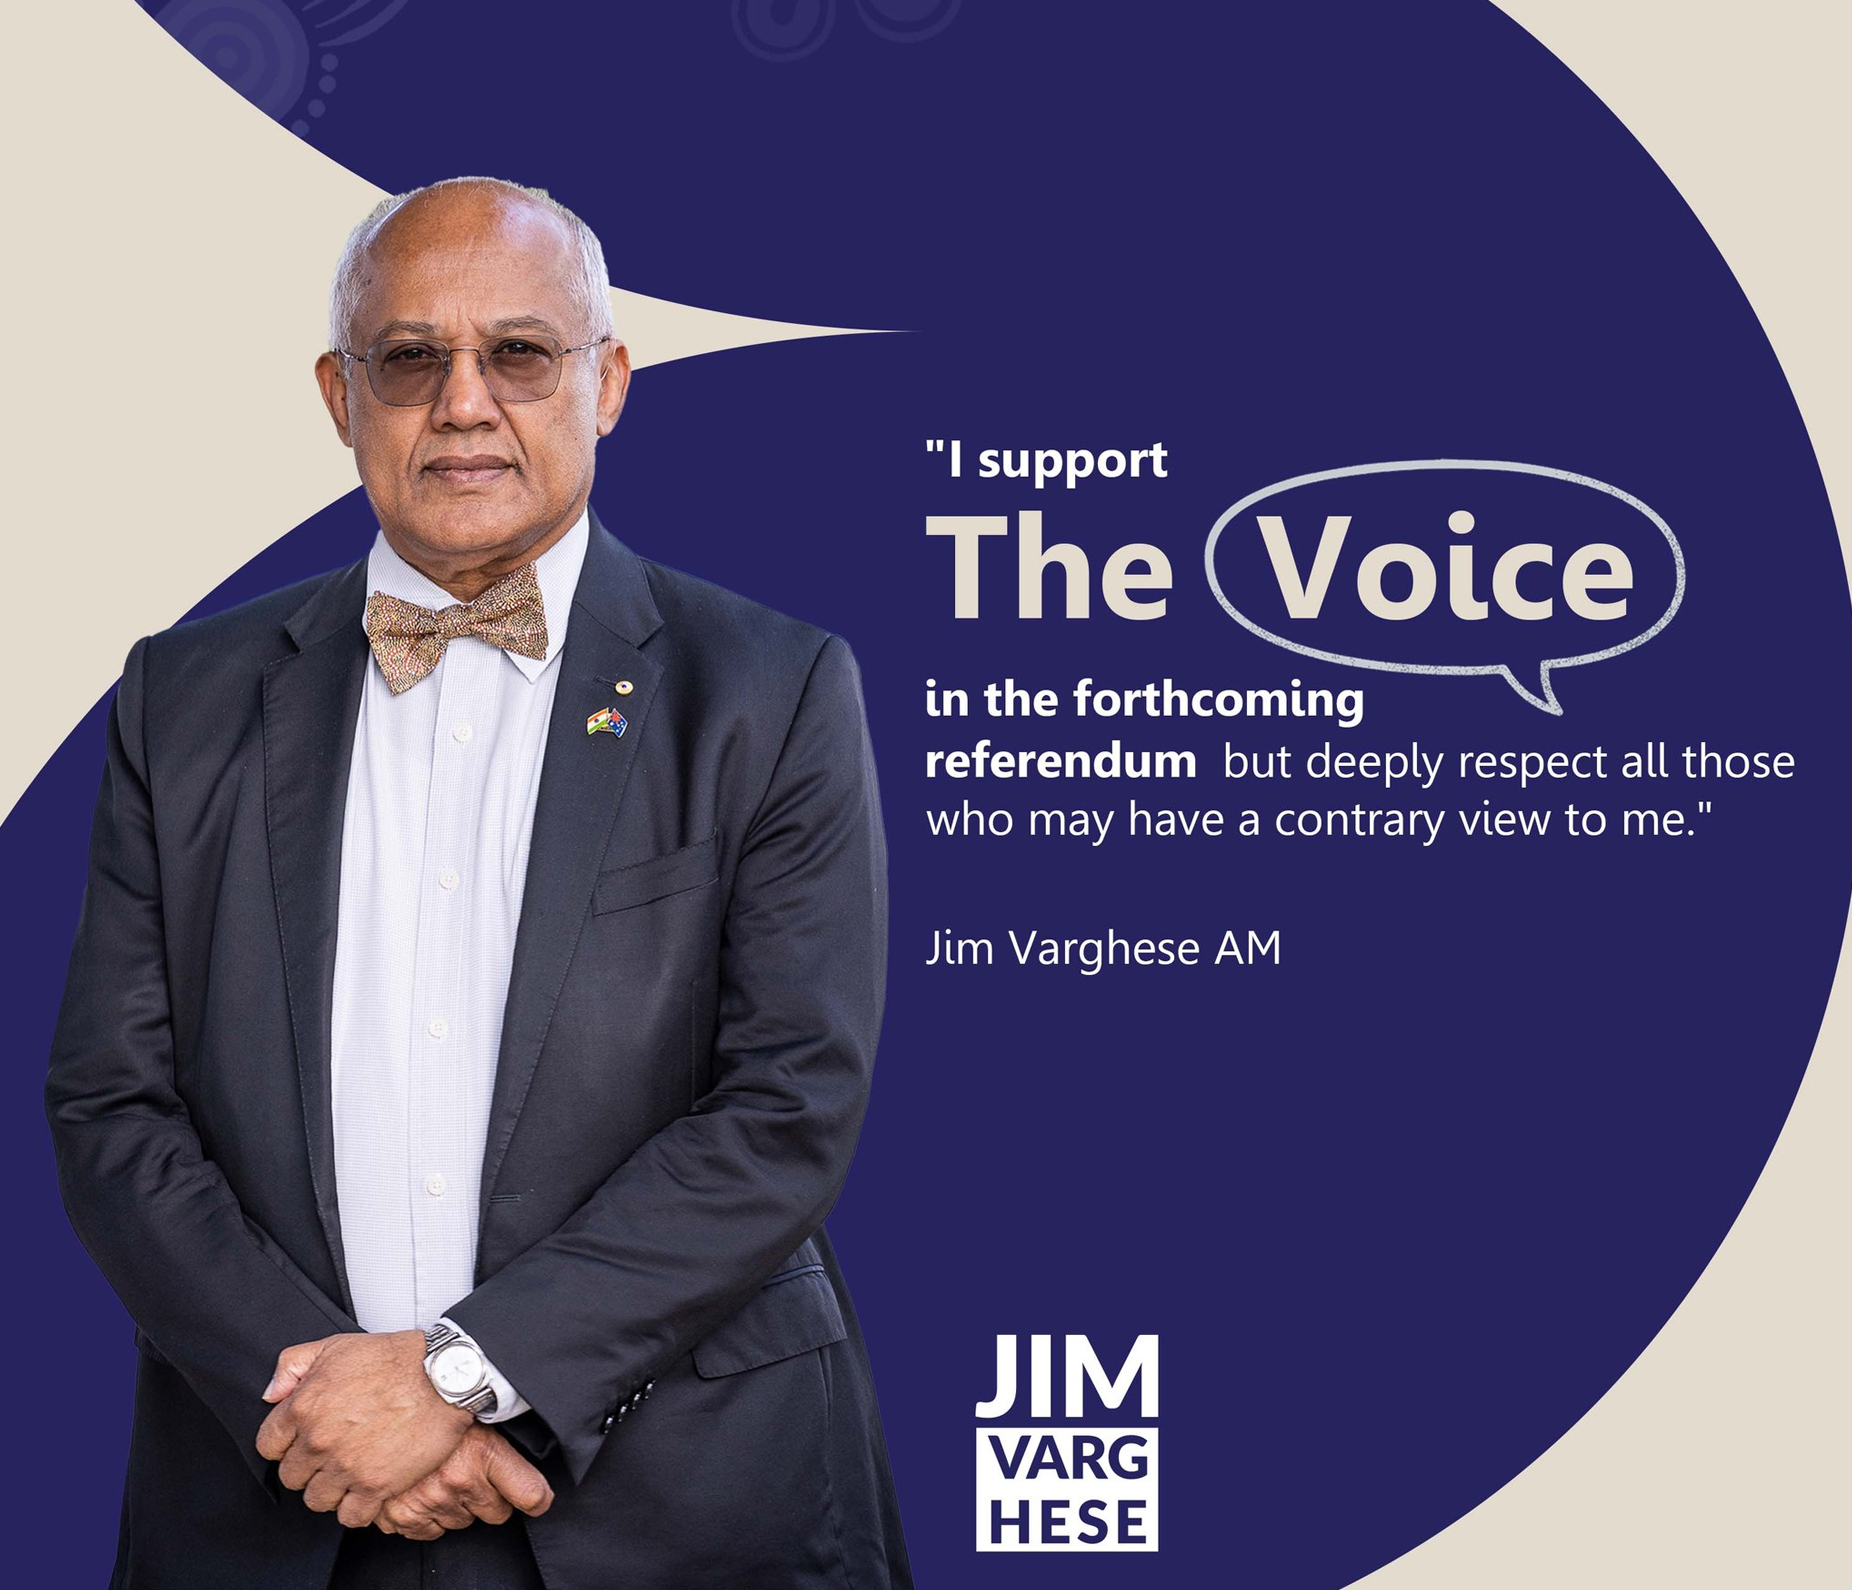 <h5></h5>
<h5 style="text-align: center;"><strong>JIM VARGHESE AM</strong><br />
(Chair – Springfield City Group | Chancellor – Torrens University Australia)</h5>
